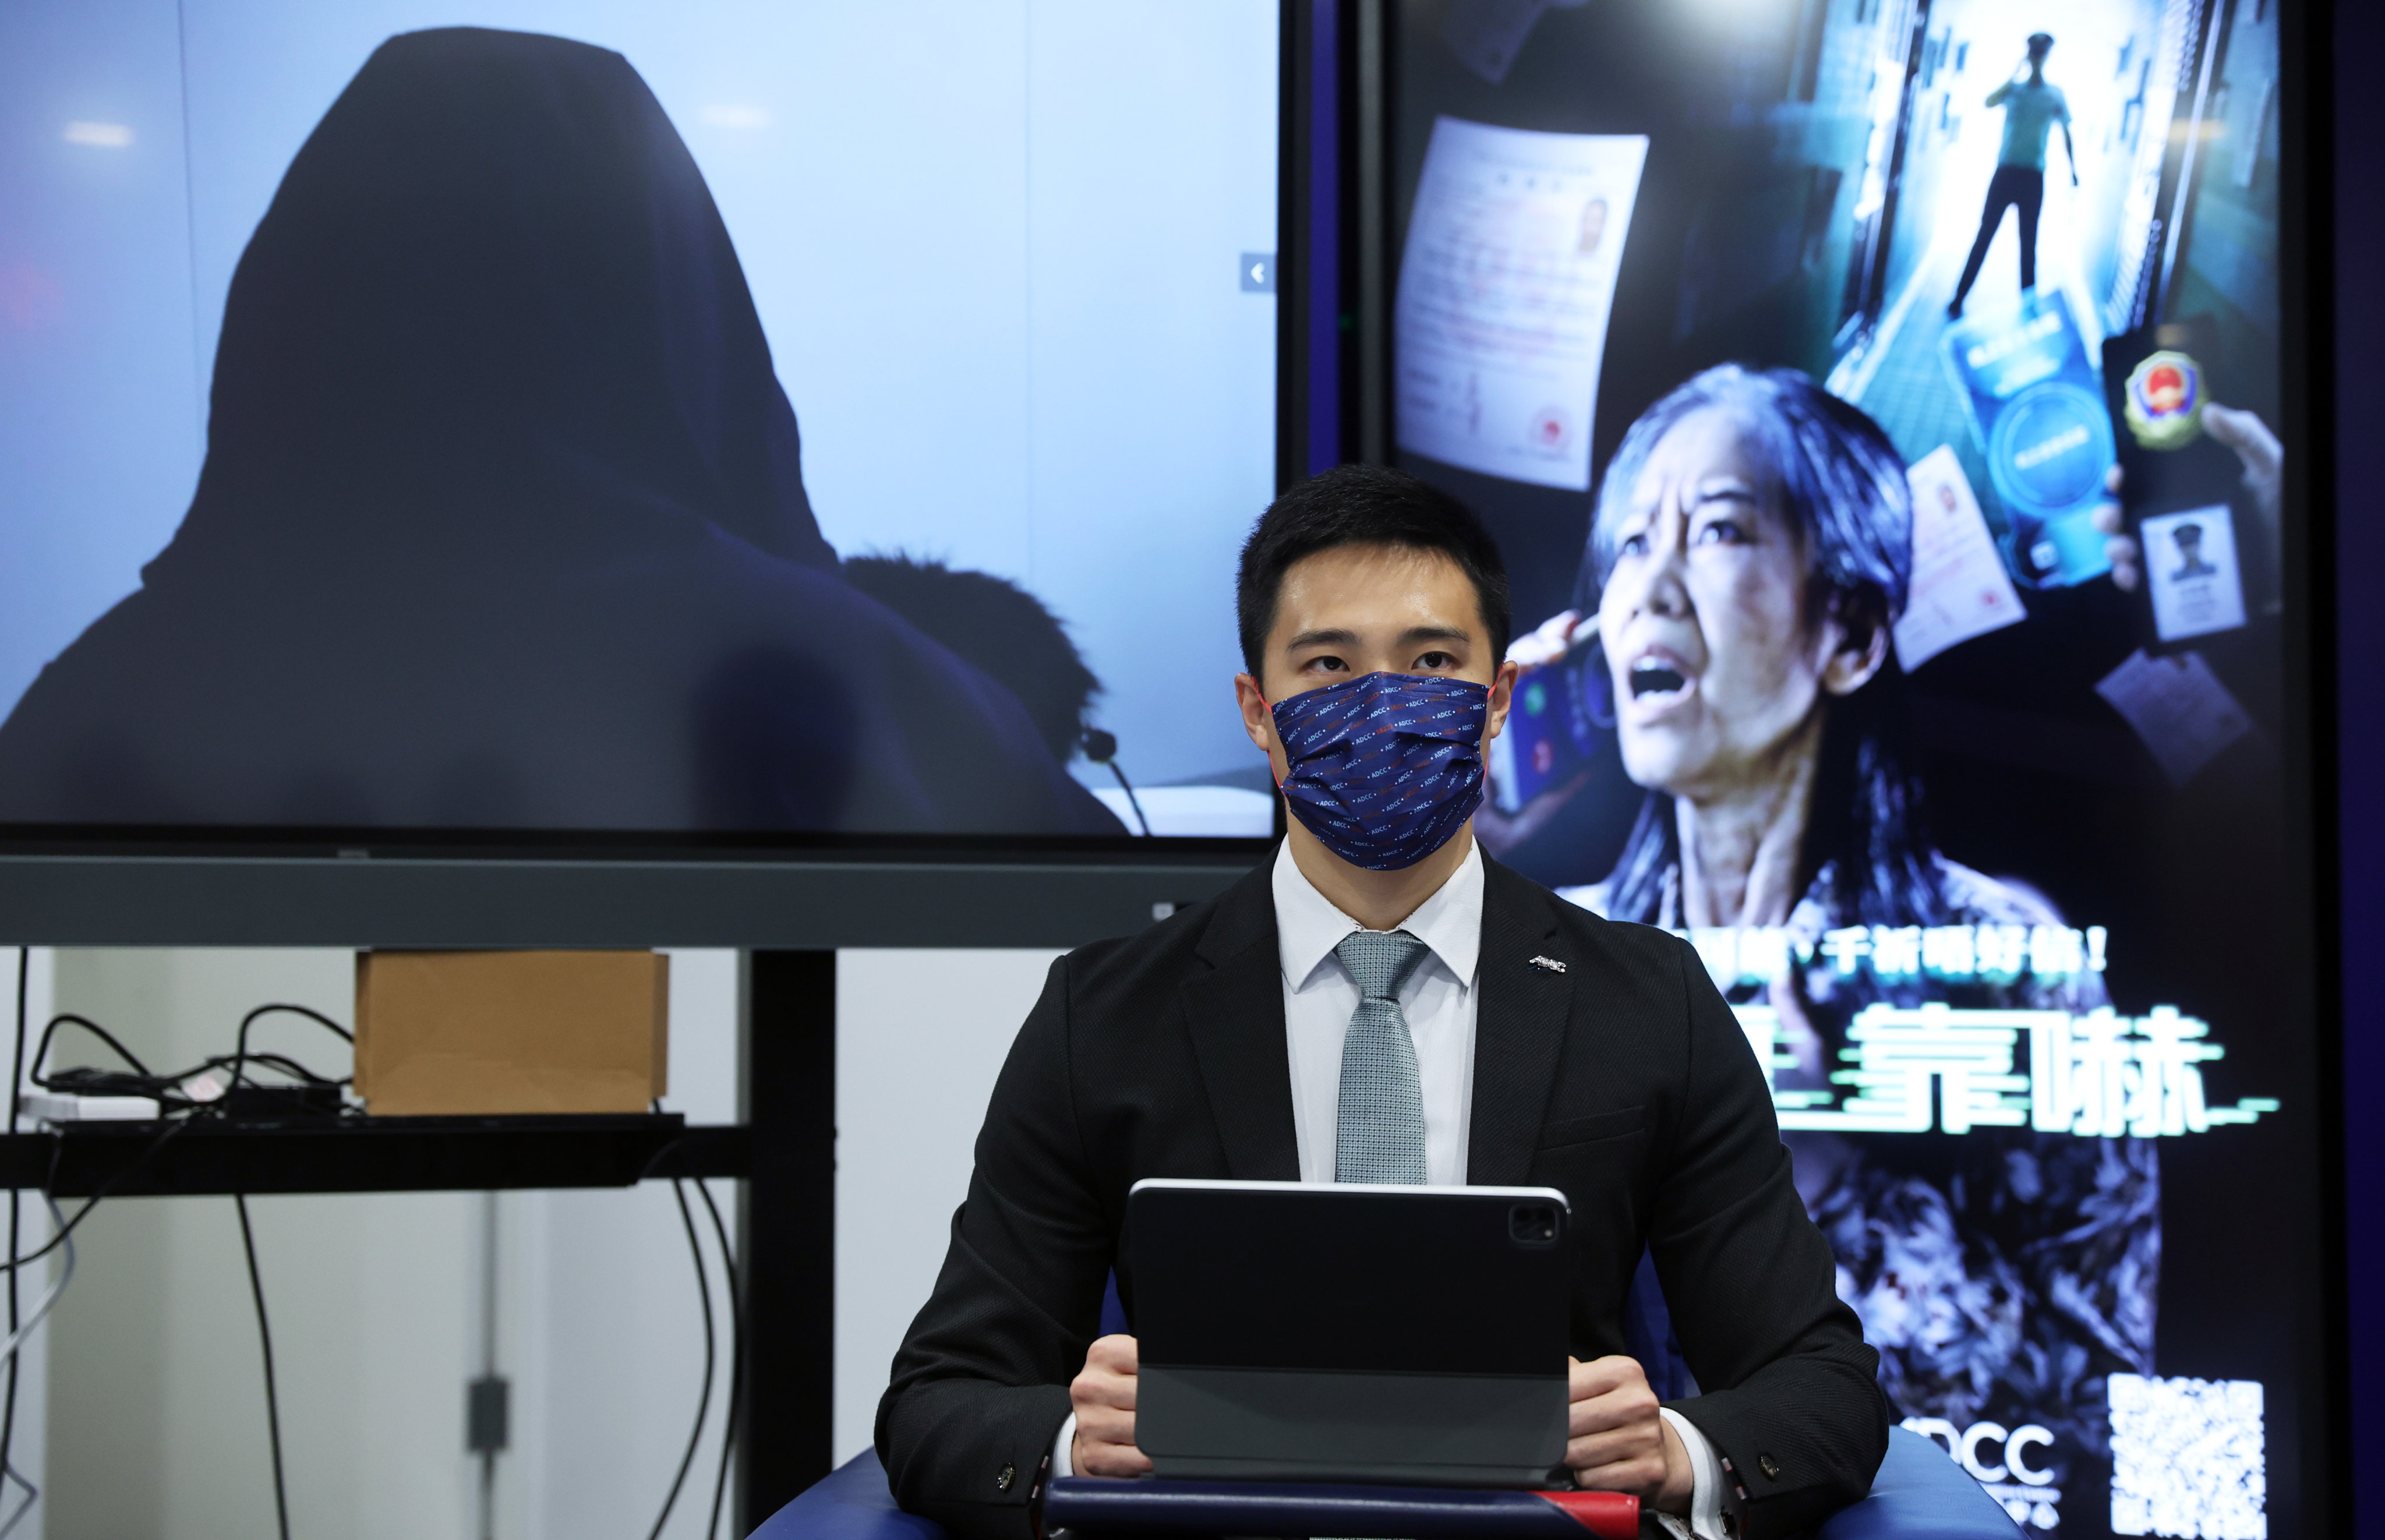 A scam victim shares her story via a phone-in at a press conference hosted by the Anti-Deception Coordination Centre of the Hong Kong police, at the police headquarters in Wan Chai on October 24 last year. Photo: Edmond So